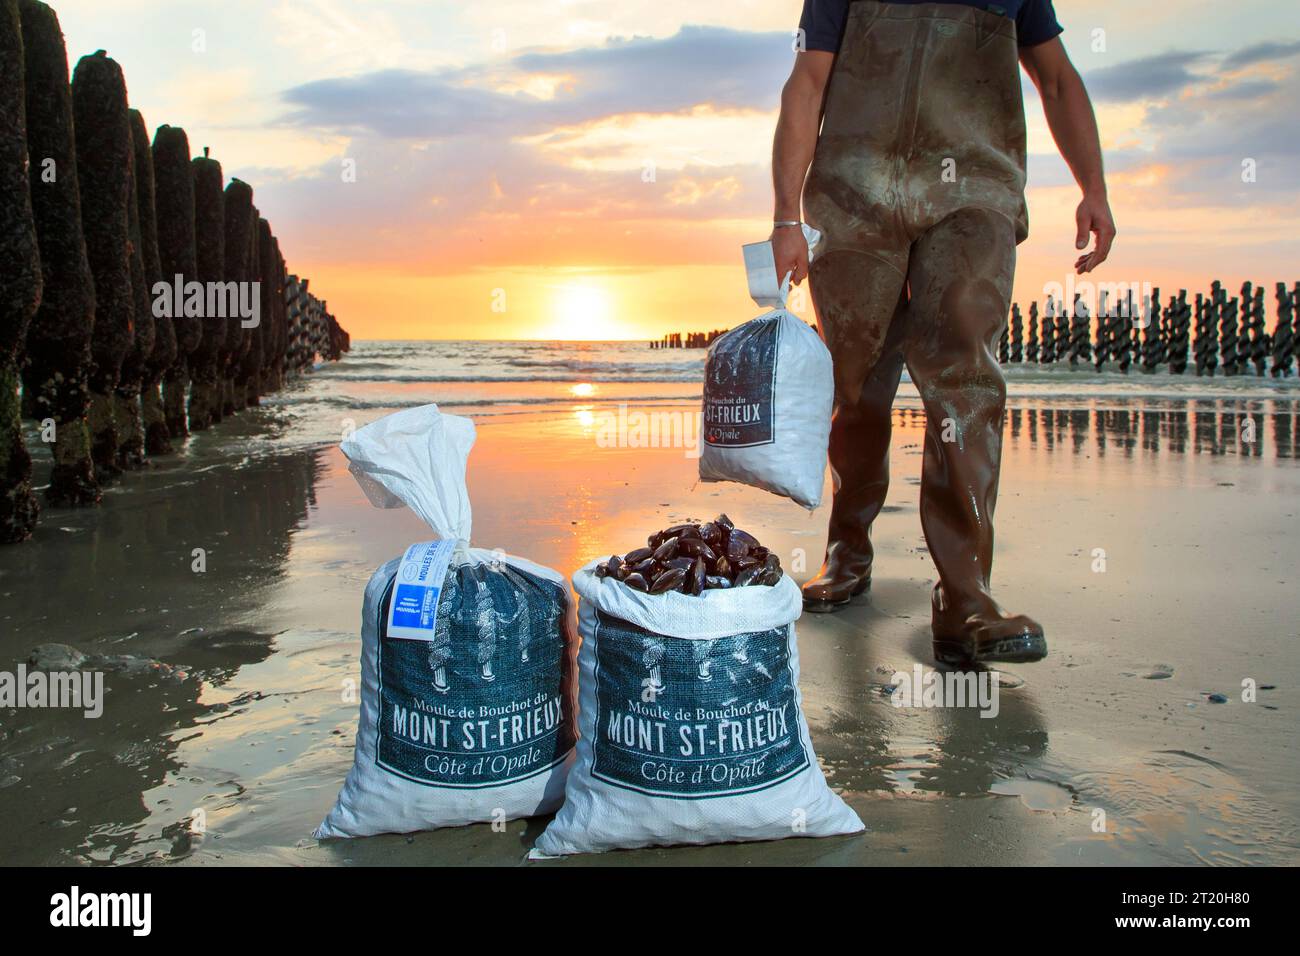 Neufchatel-Hardelot (northern France): farmed mussels from Mont Saint-Frieux Stock Photo